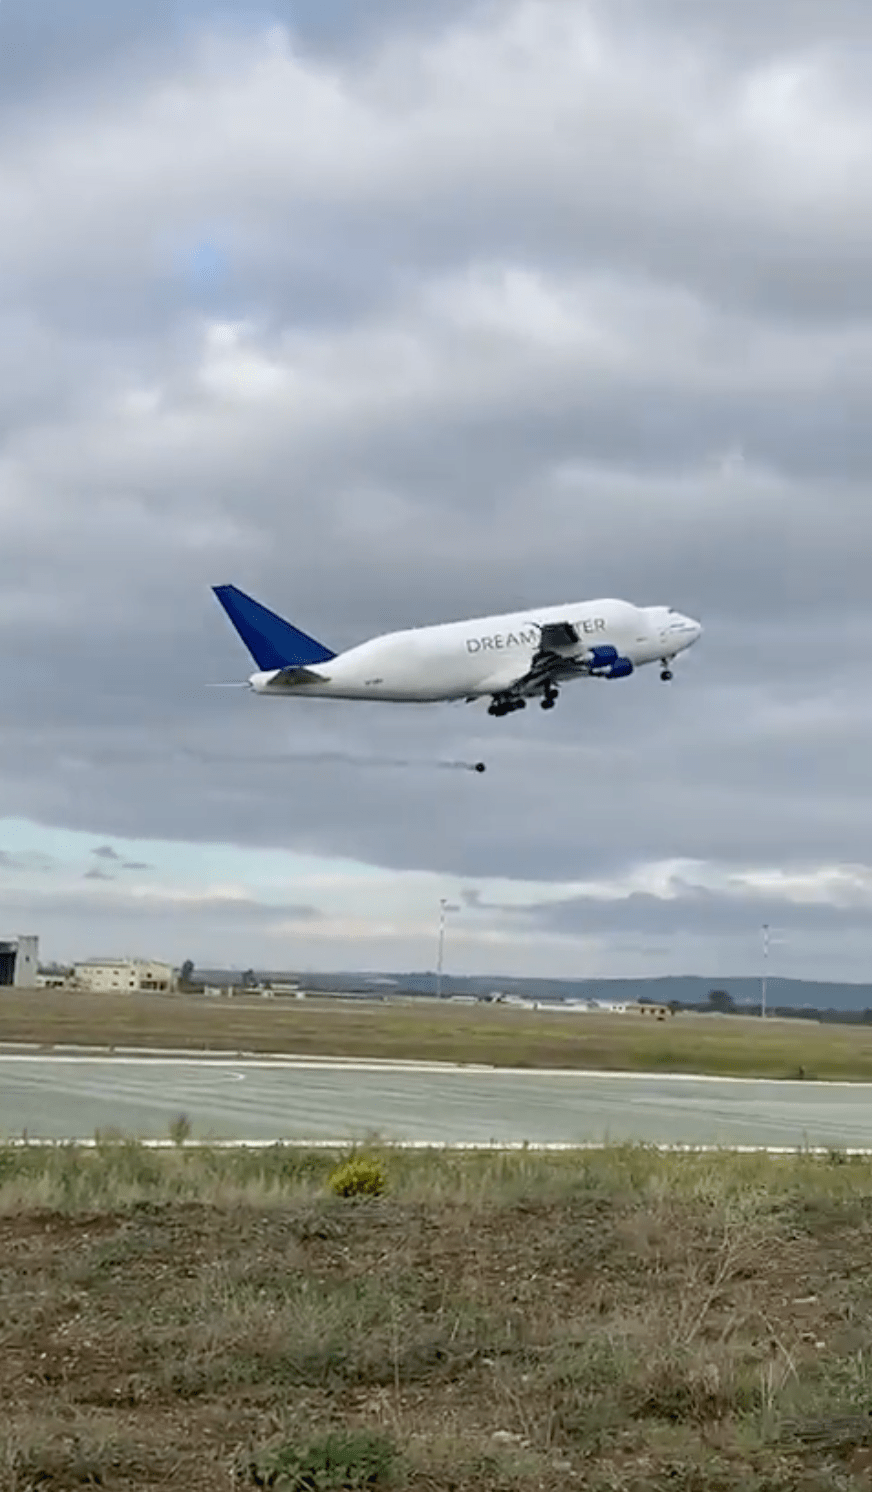 Watch: boeing 747 airplane loses one of its 'biji' during takeoff in italy | weirdkaya